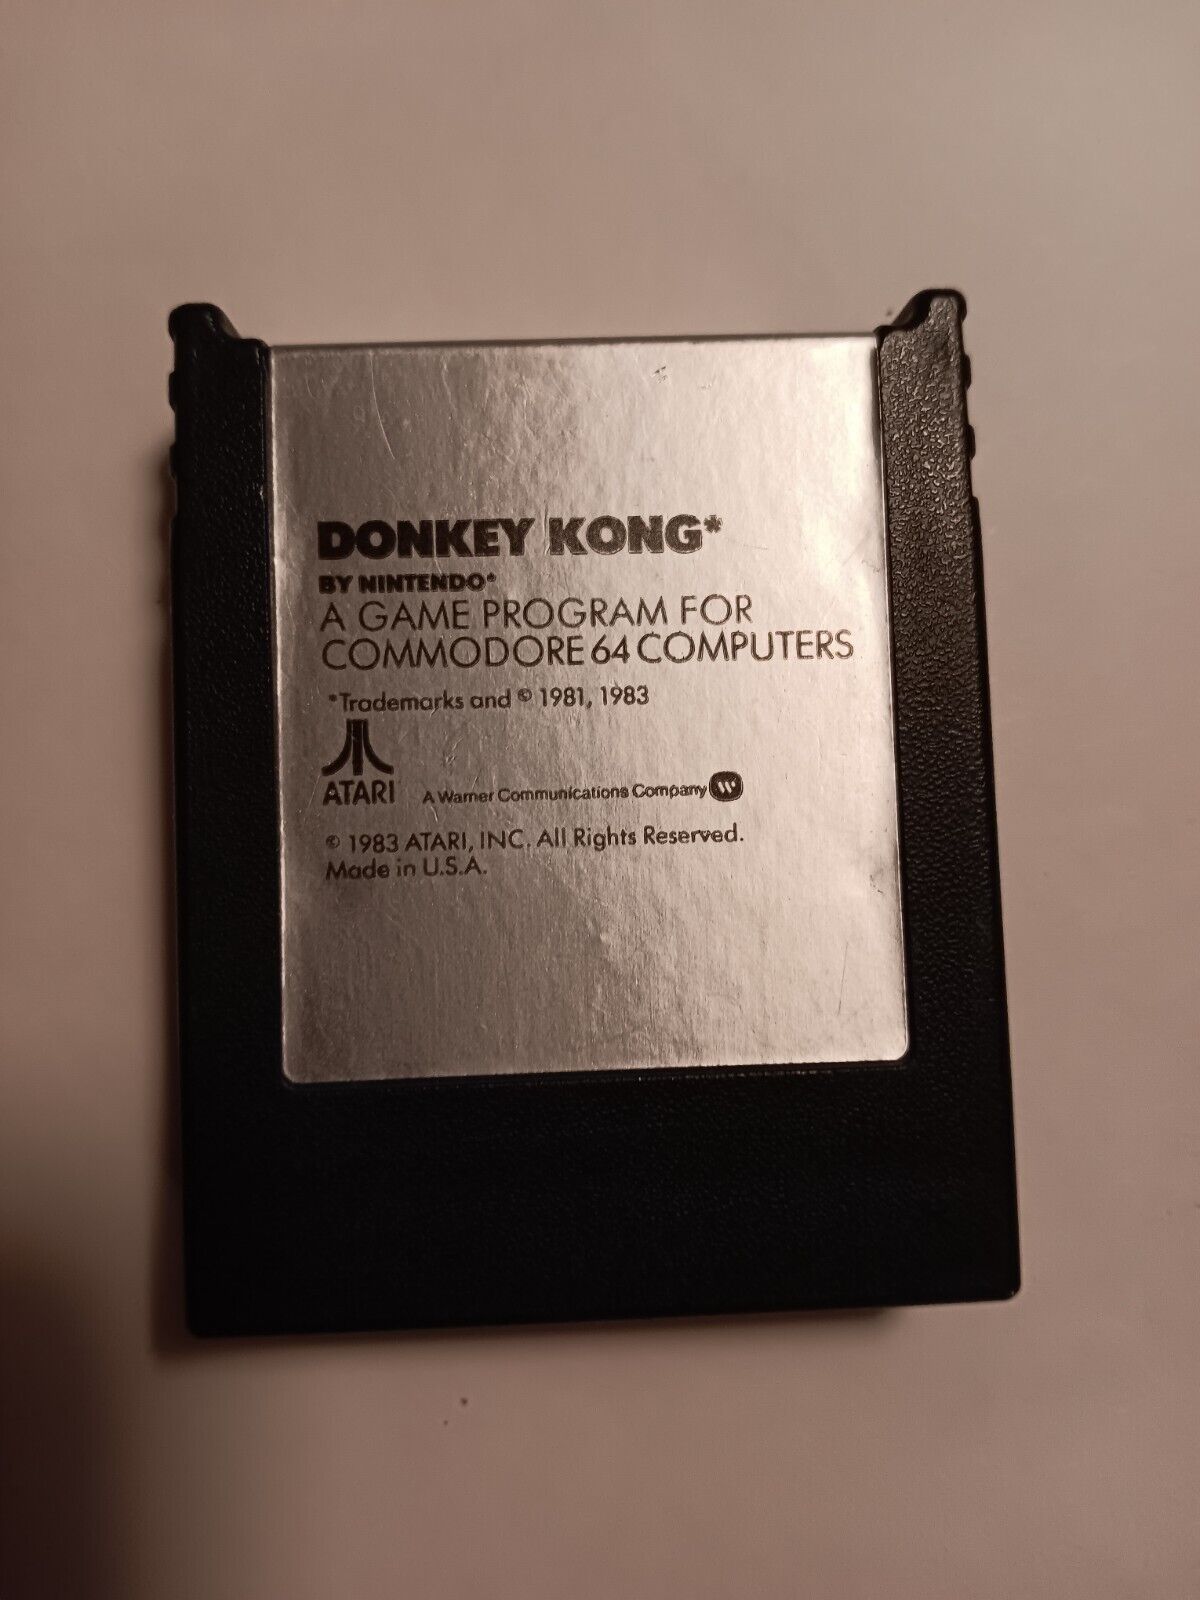 VTG Commodore 64 Donkey Kong Computer Game Cartridge - Tested/Works